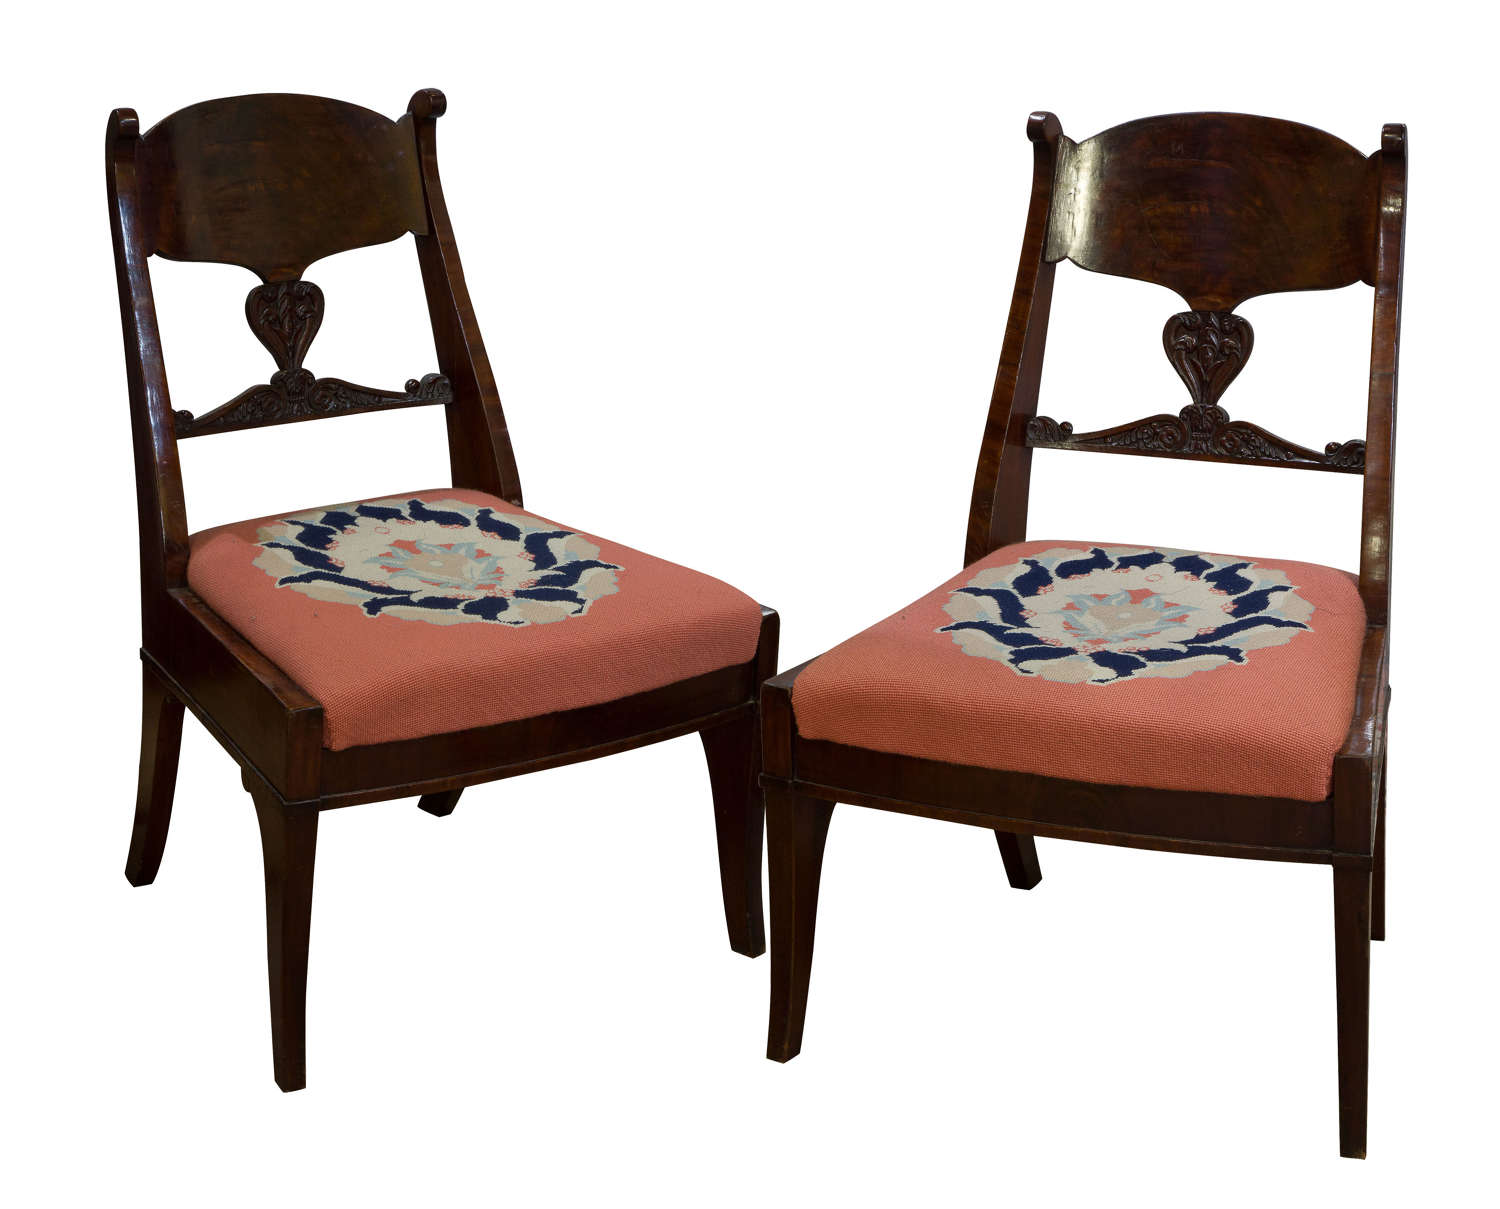 Pair of Russian mahogany side chairs